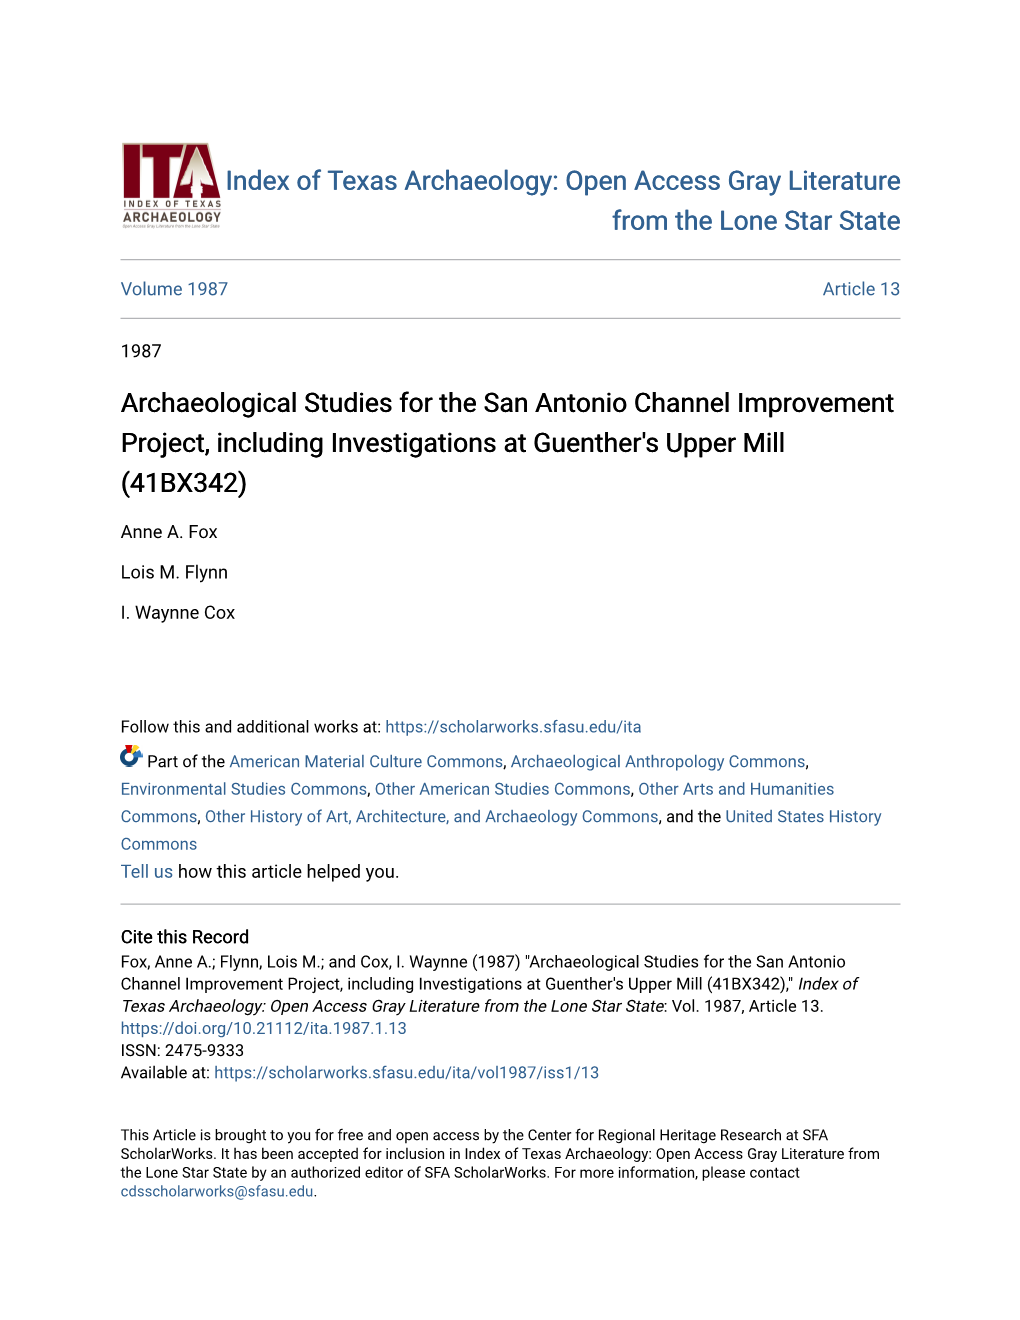 Archaeological Studies for the San Antonio Channel Improvement Project, Including Investigations at Guenther's Upper Mill (41BX342)